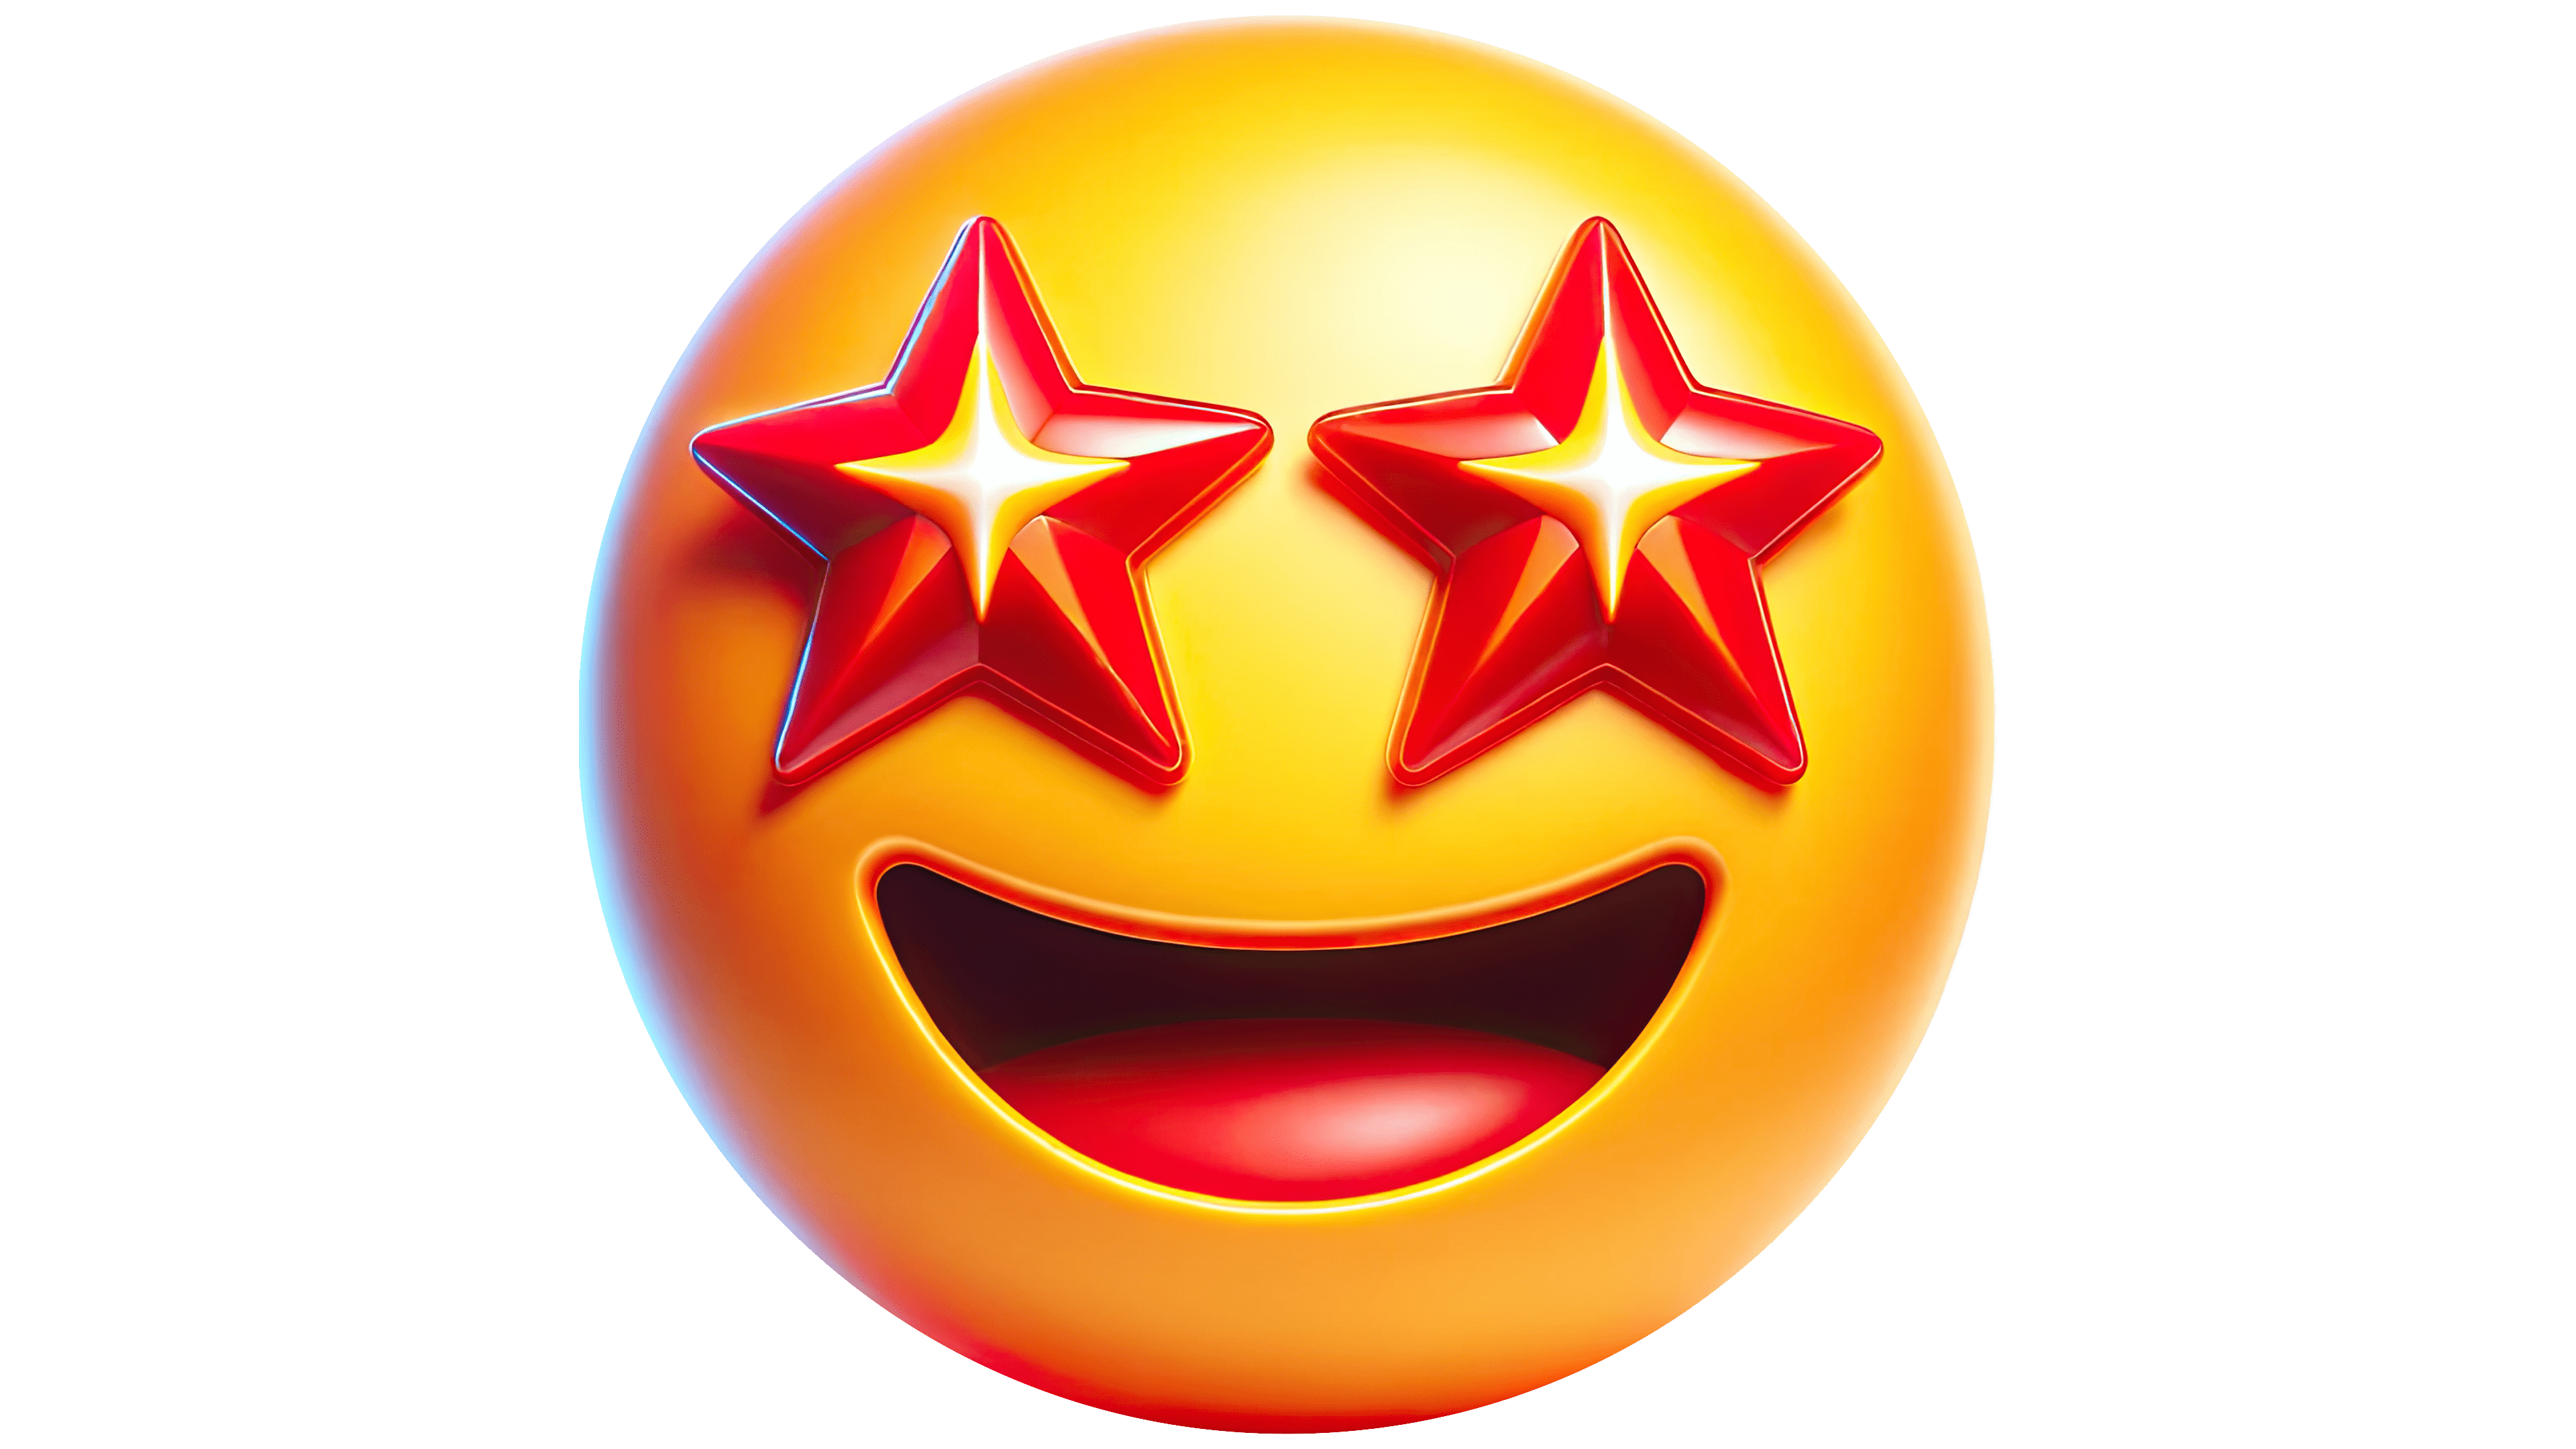 Star Eyes Emoji - what it means and how to use it